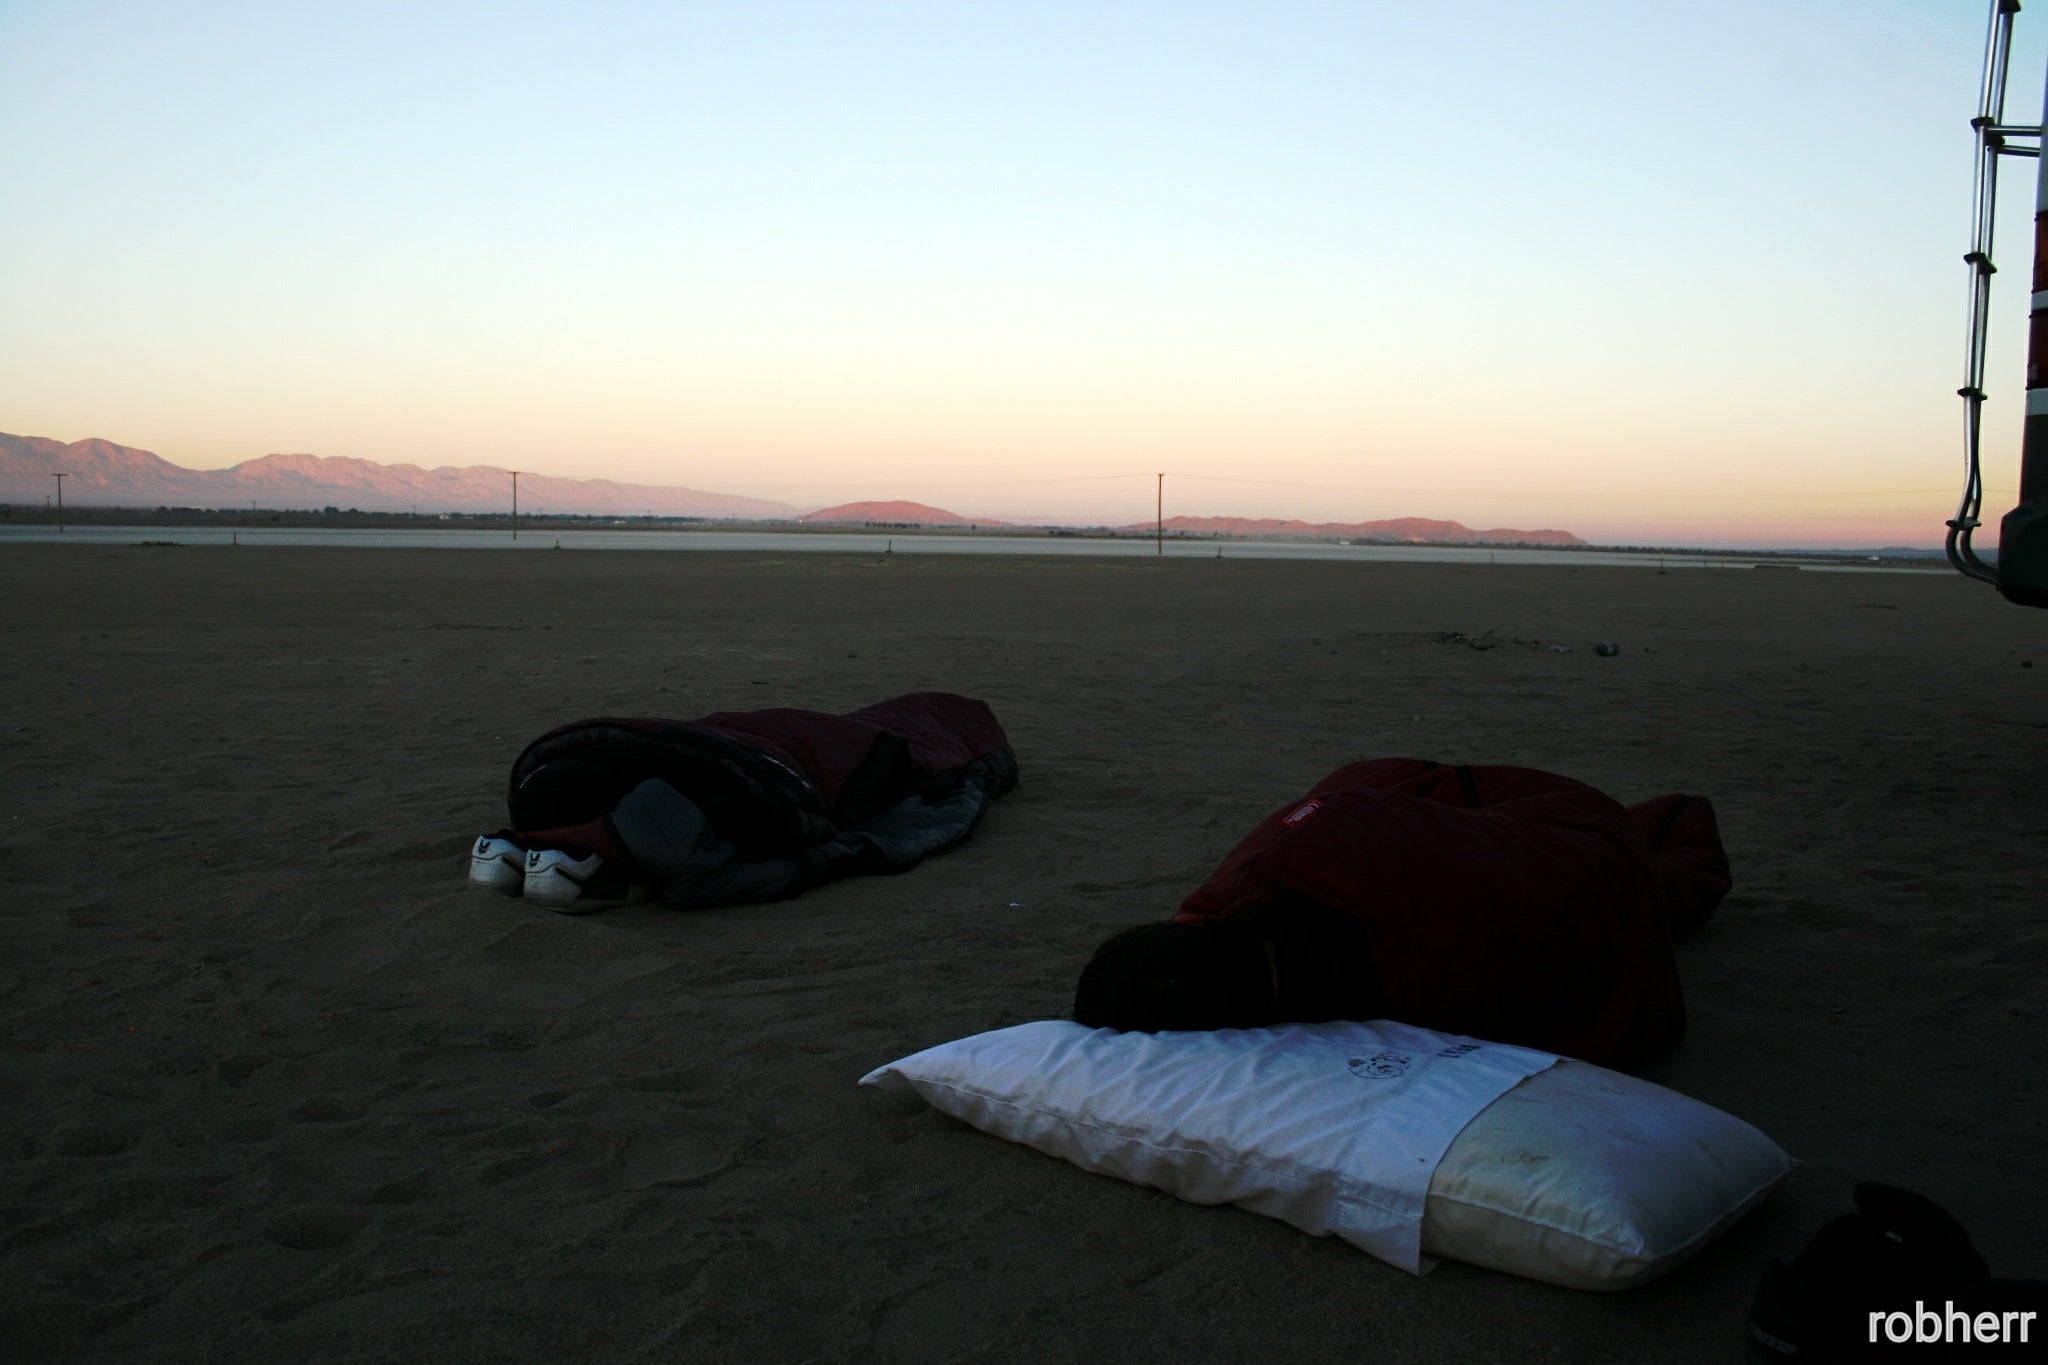 They were brave to sleep out on the ground